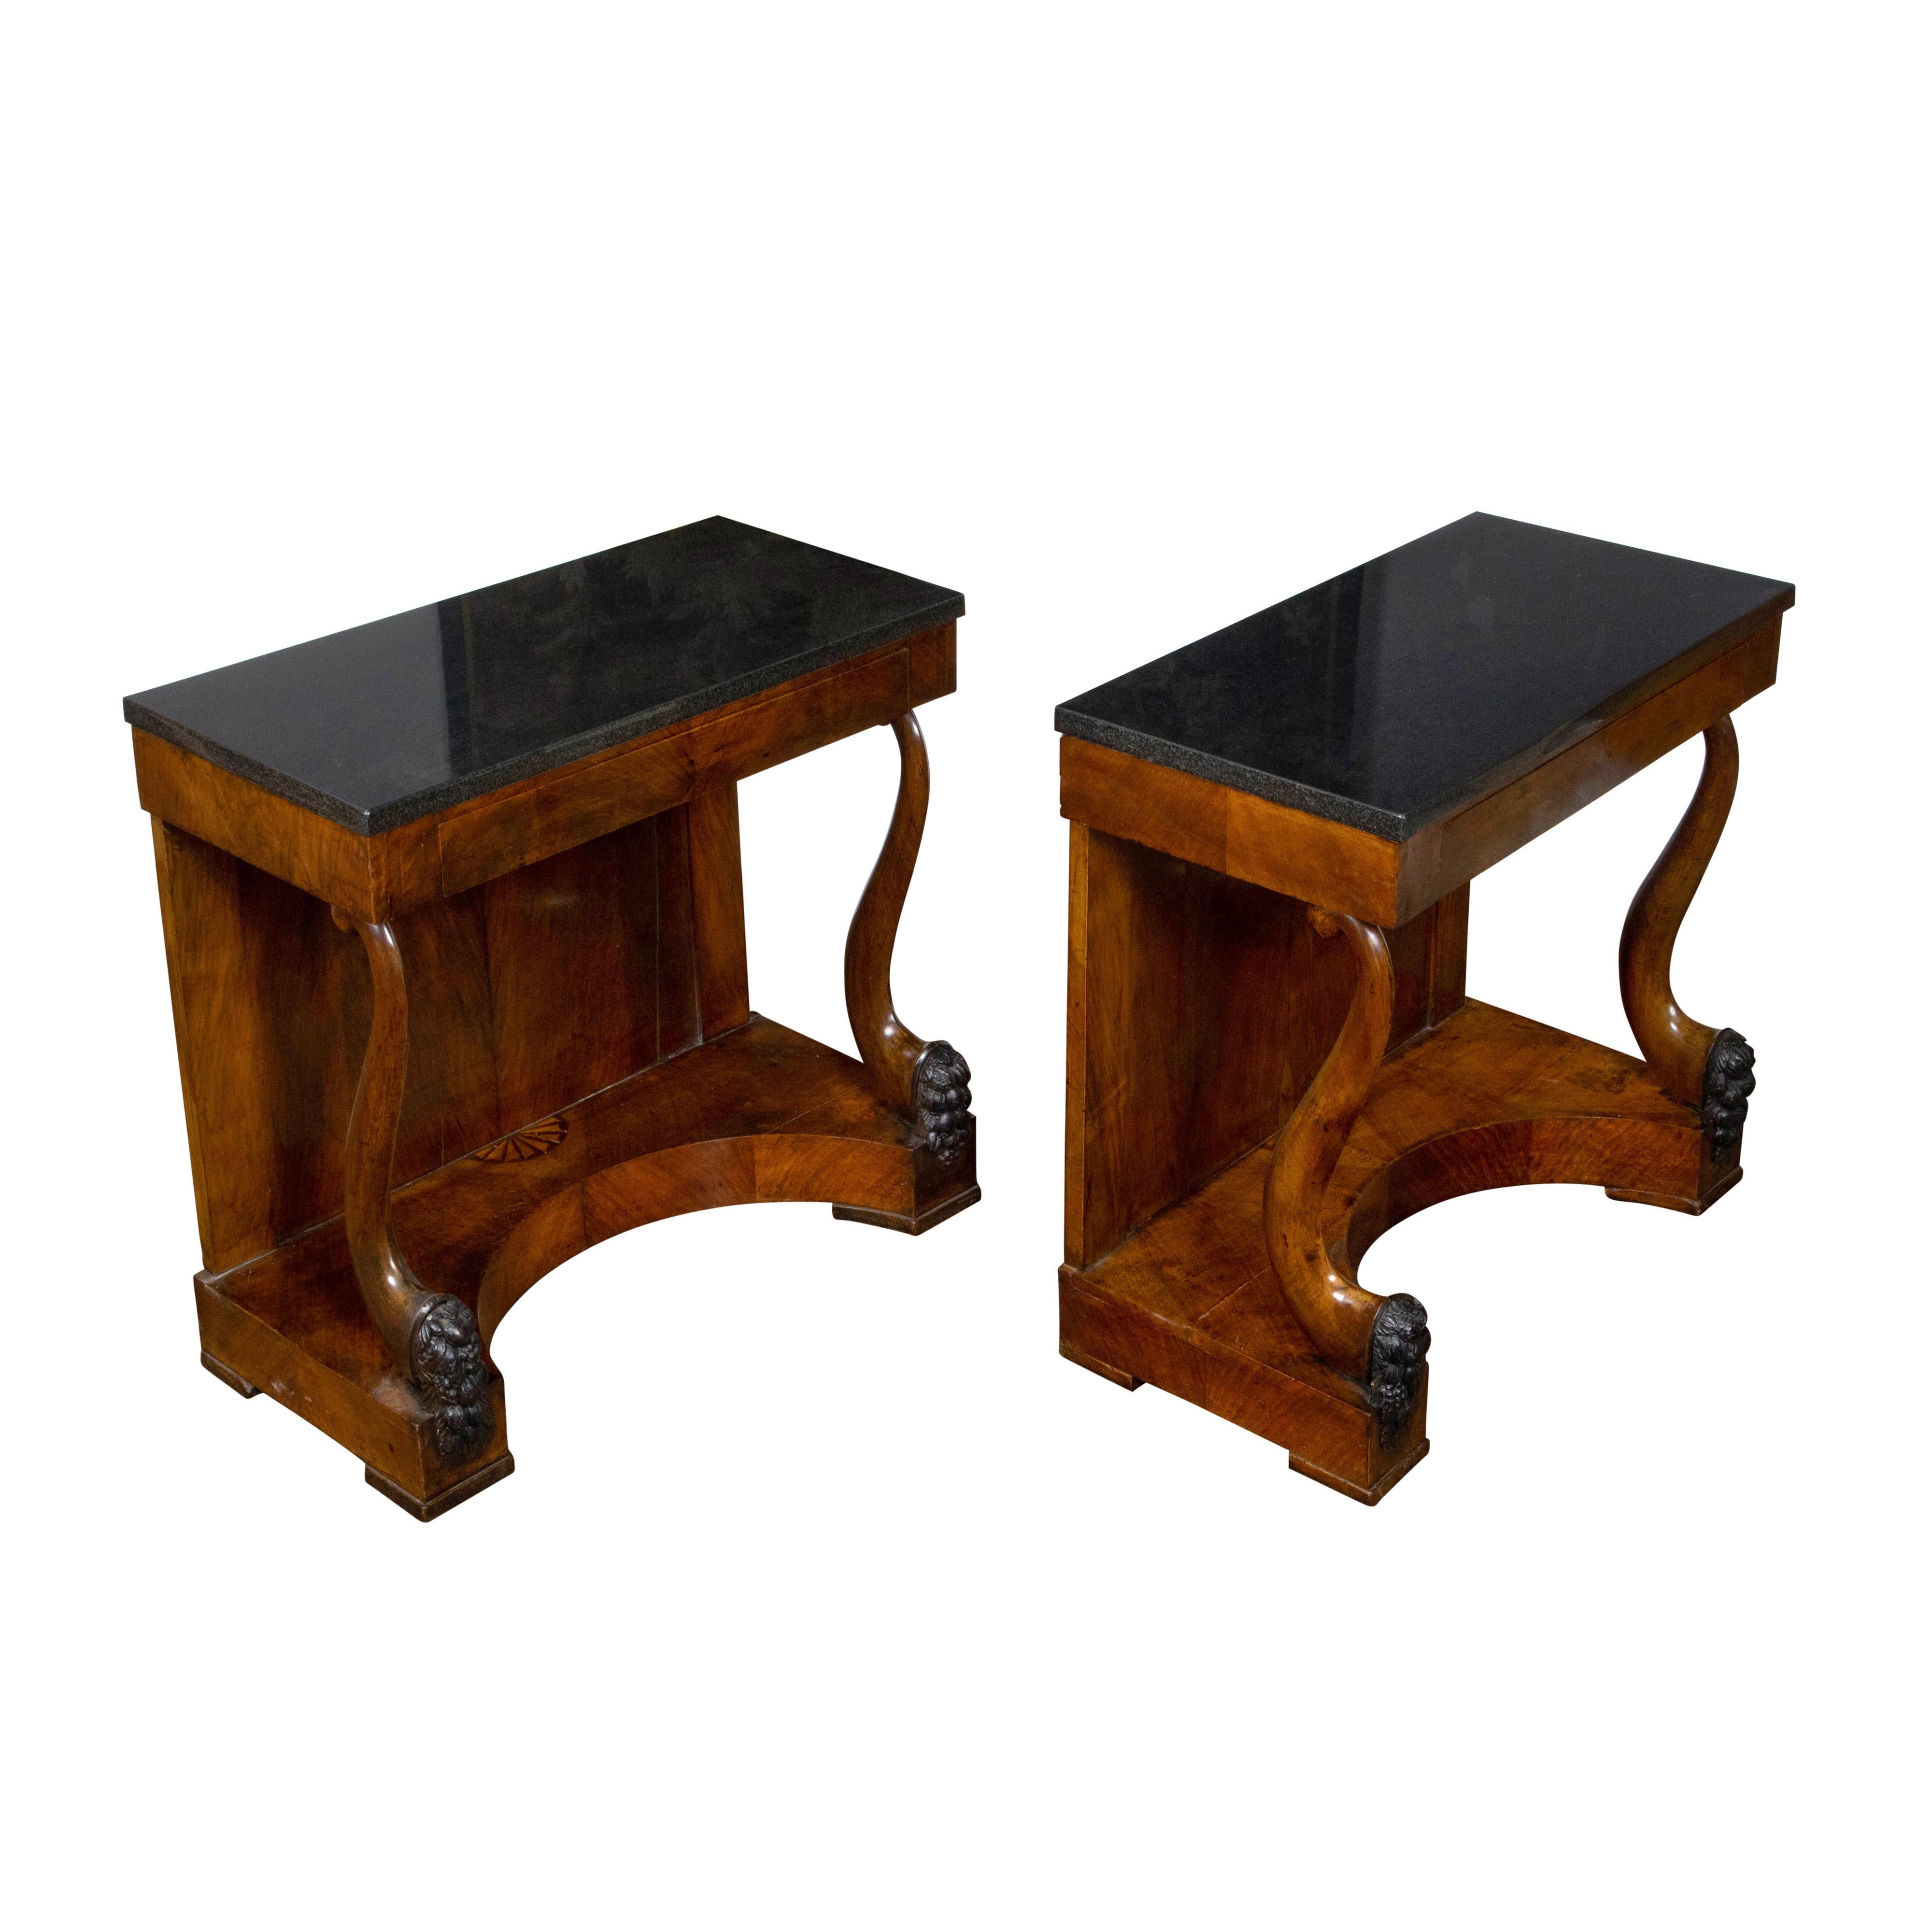 Pair of Austrian Biedermeier Period 19th Century Walnut and Marble Consoles For Sale 3